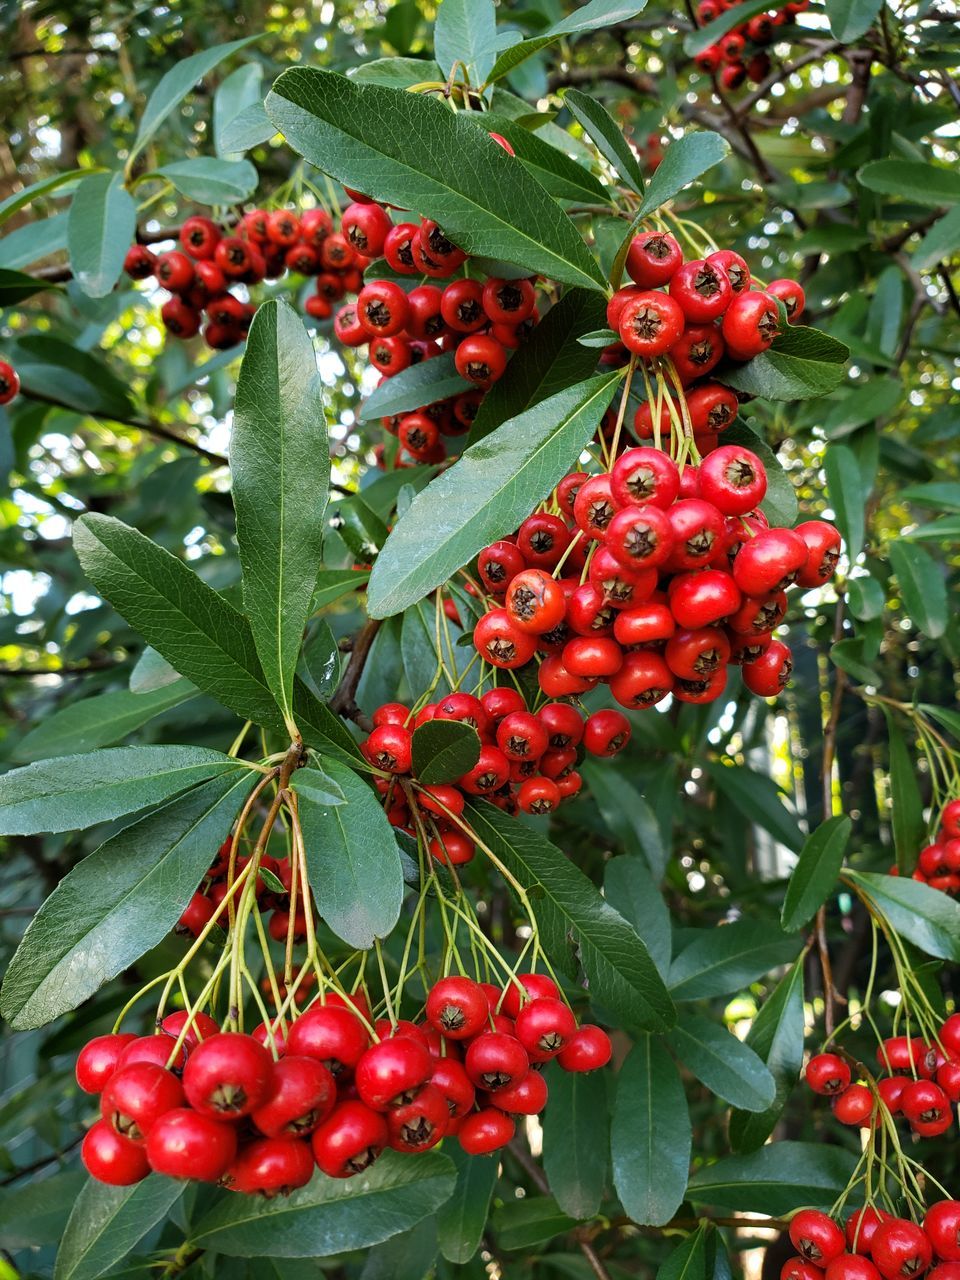 red, plant, food and drink, fruit, food, leaf, healthy eating, plant part, growth, freshness, berry, nature, green, tree, flower, evergreen, no people, produce, shrub, beauty in nature, wellbeing, rowan, holly, day, outdoors, close-up, branch, ripe